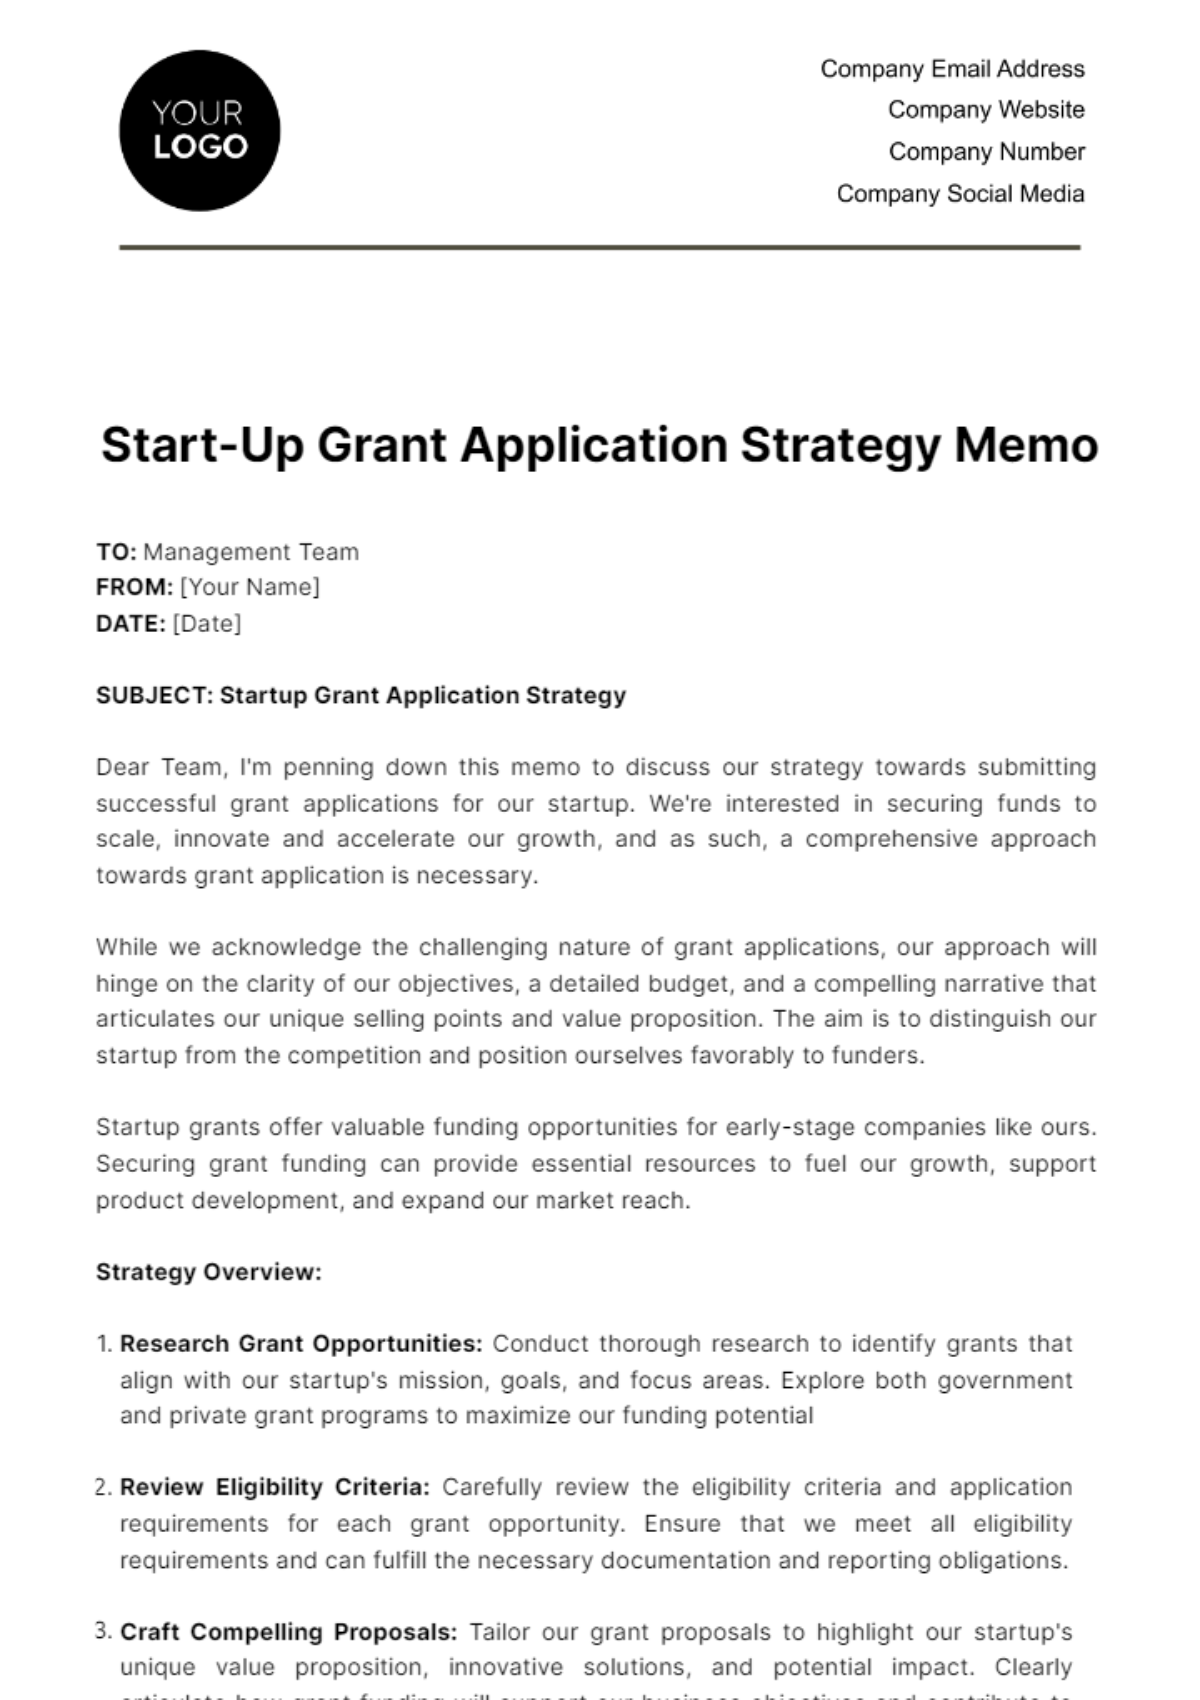 Free Startup Grant Application Strategy Memo Template